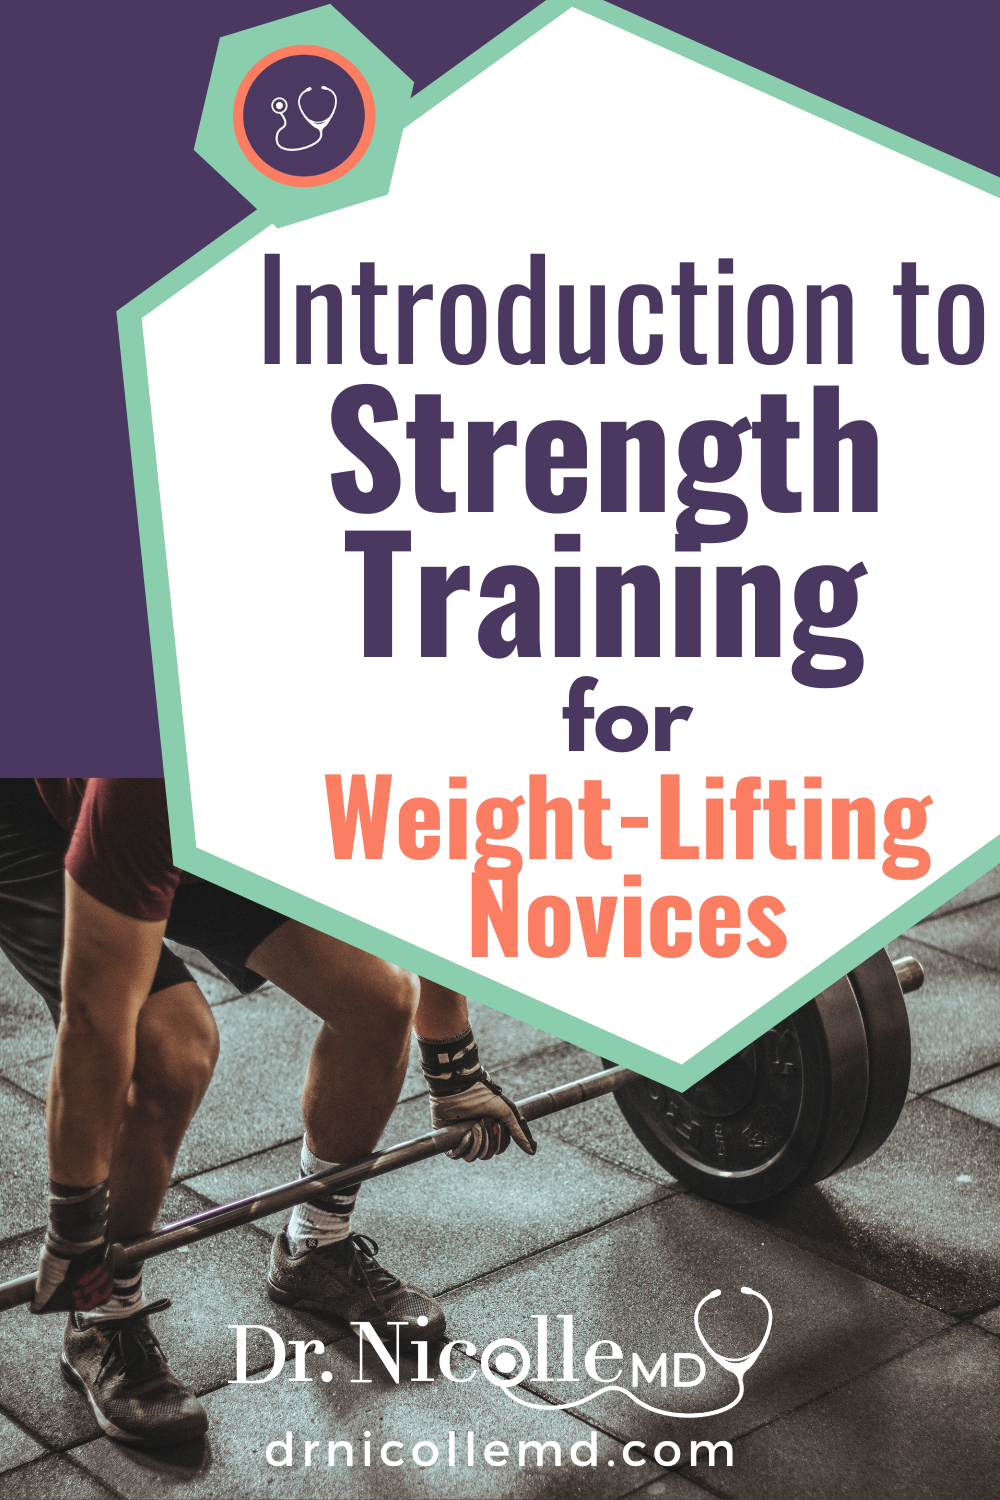 Introduction to Strength Training for Weight-Lifting Novices